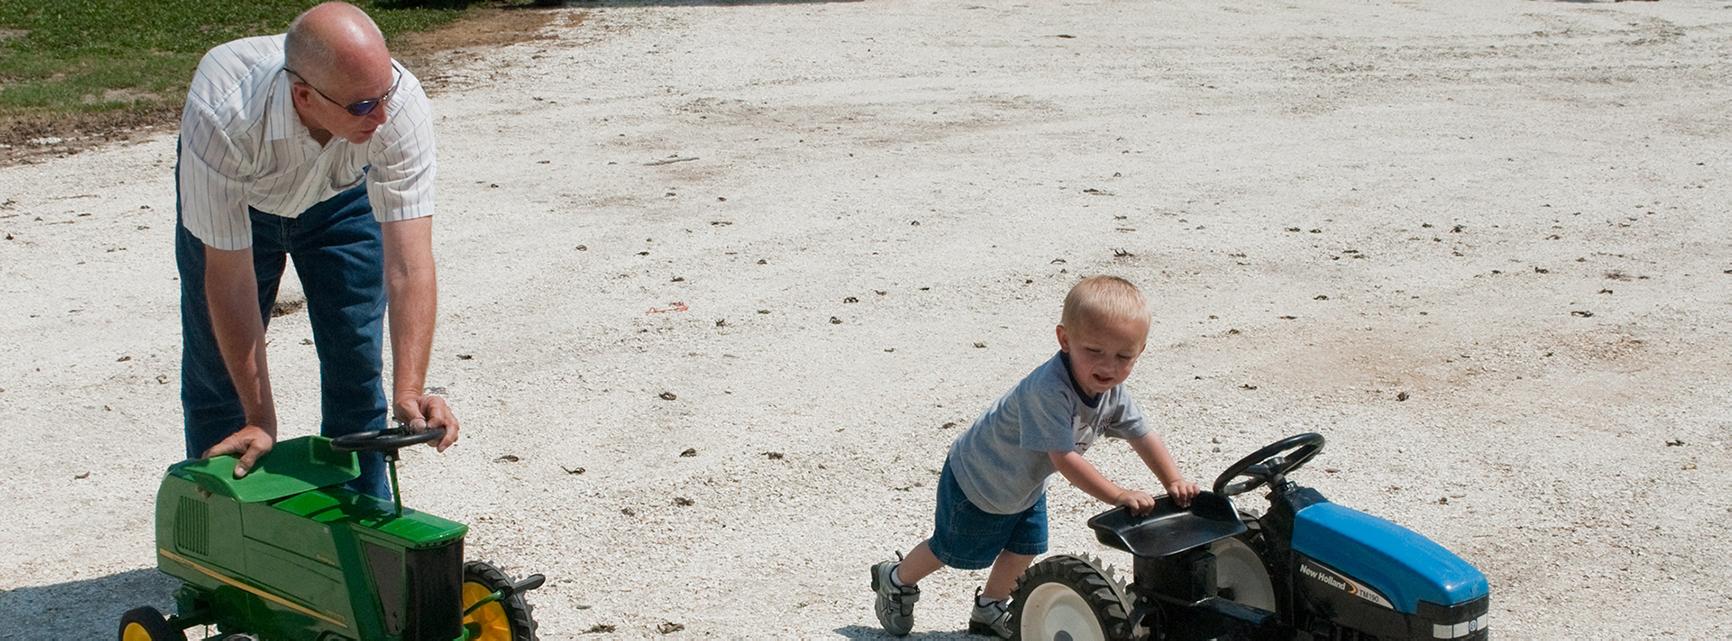 Father and son pushing small toy versions of farm equipment machinery